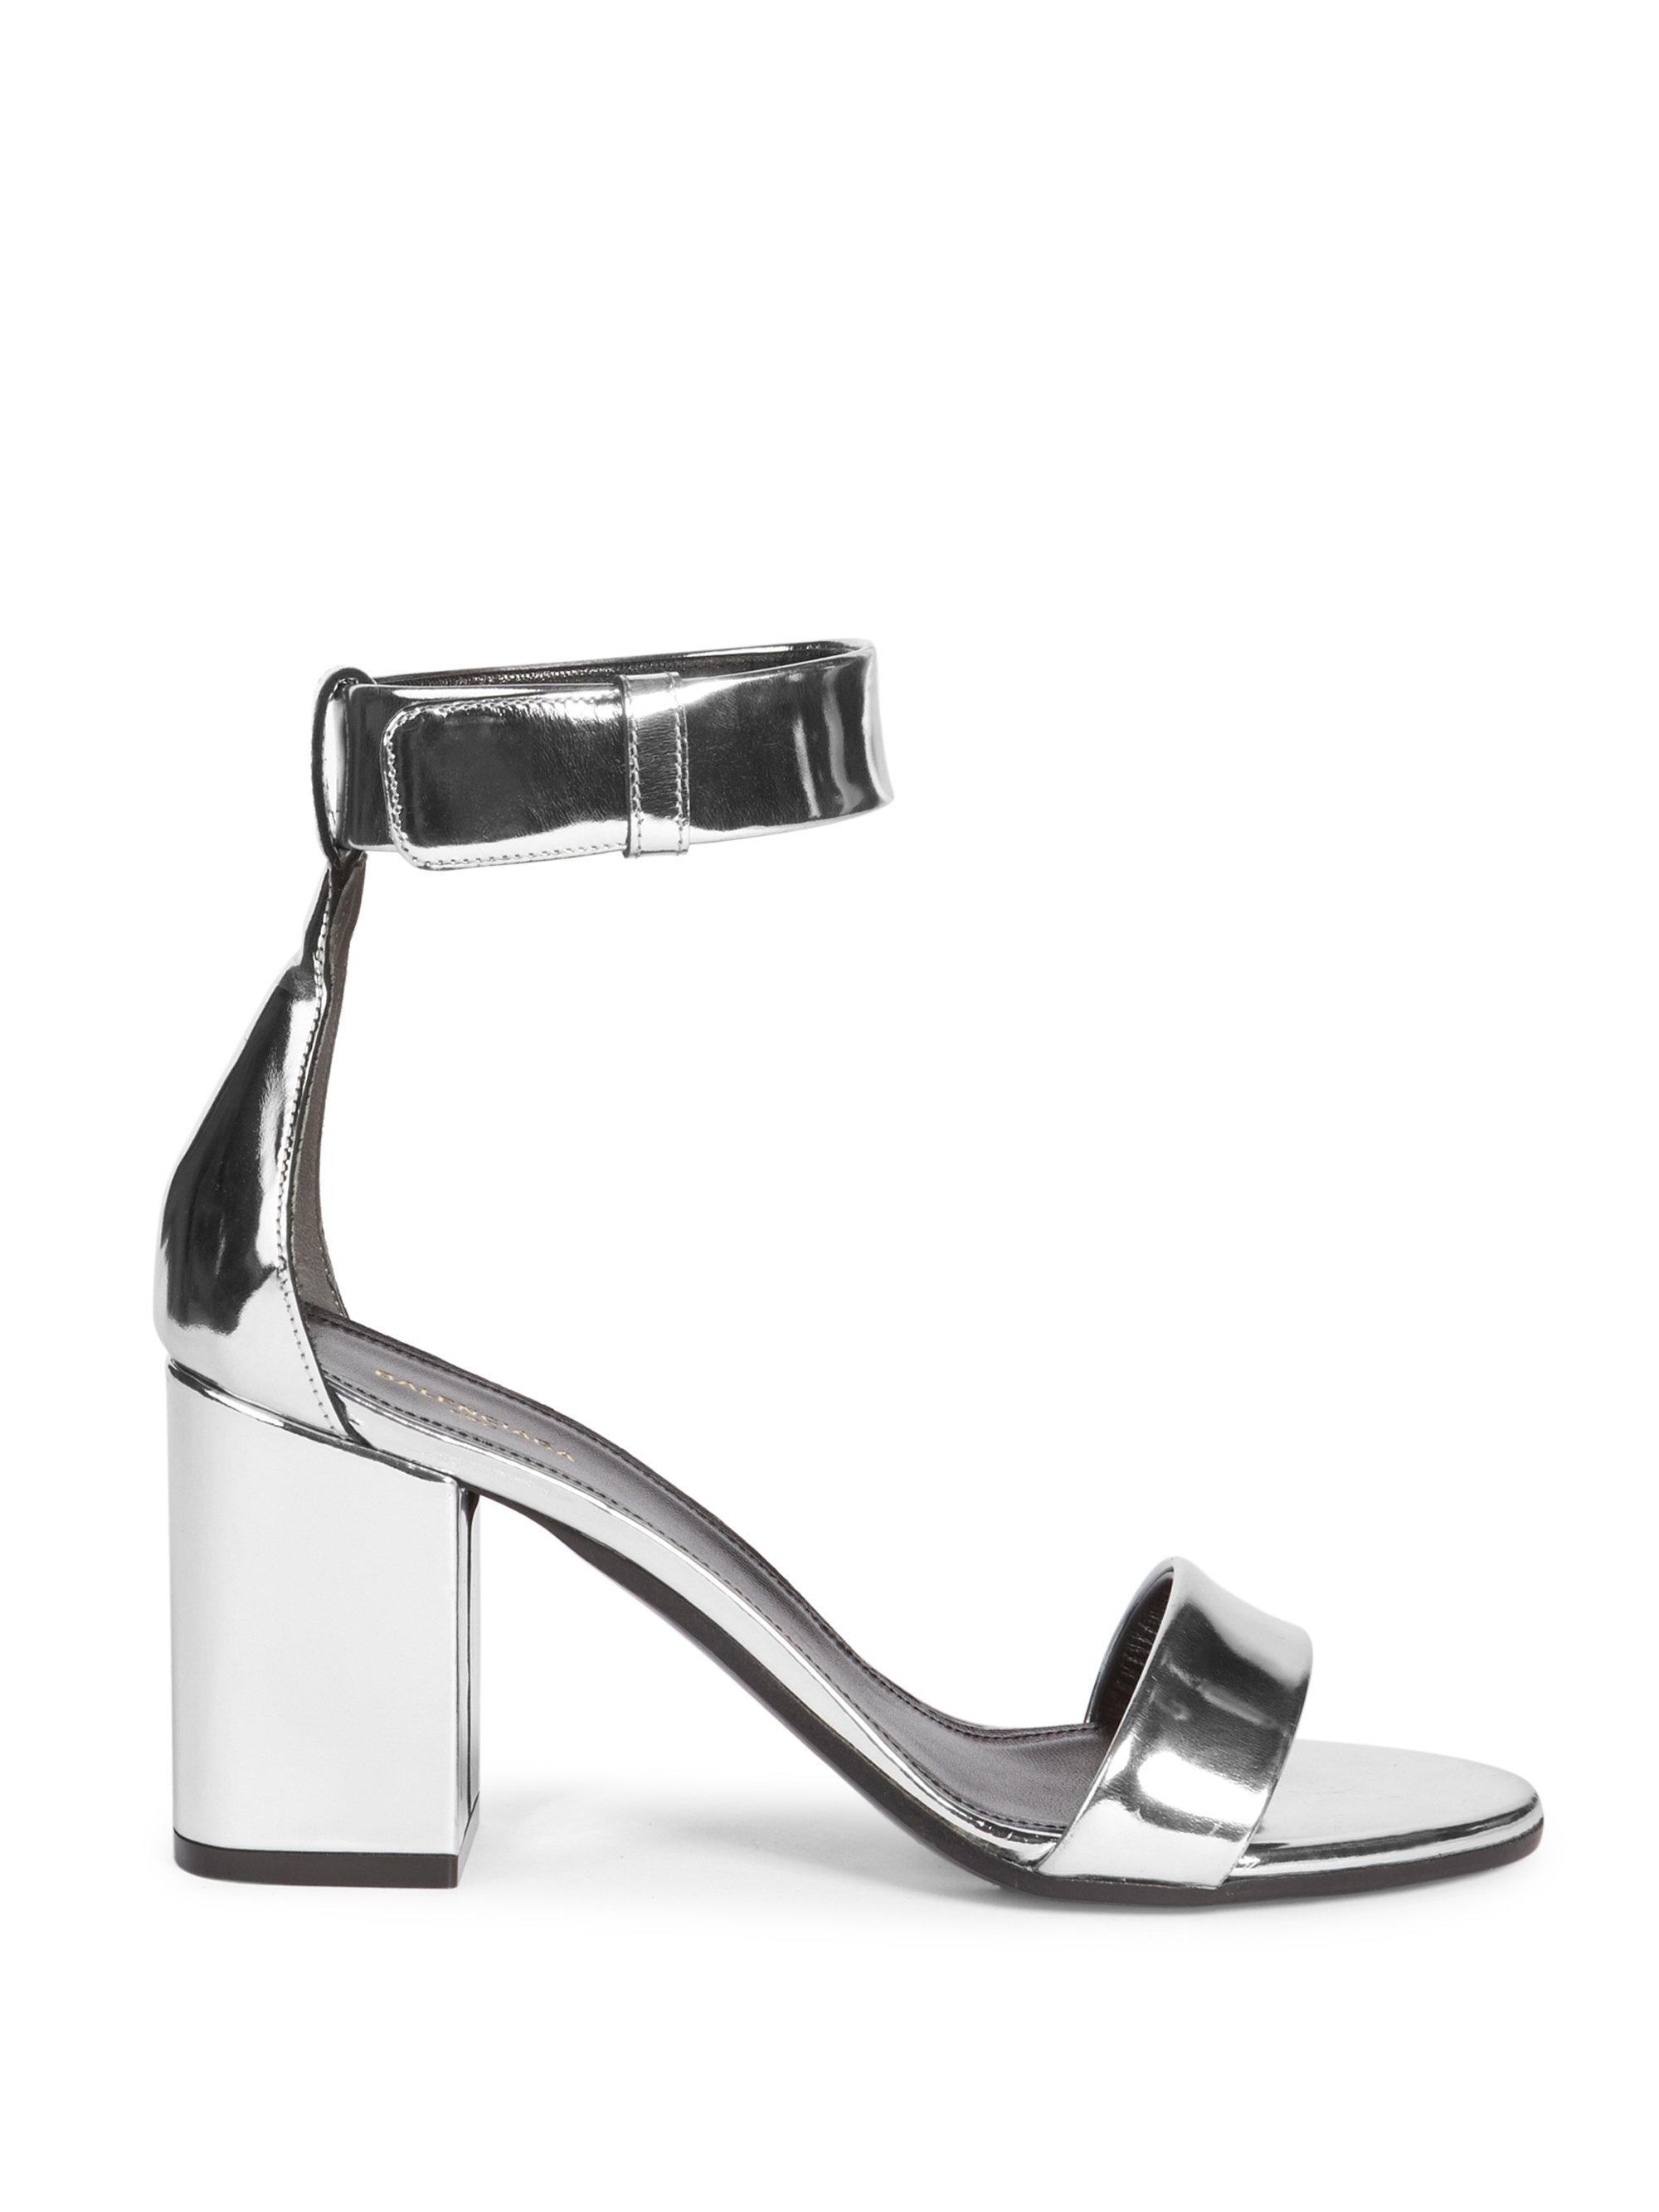 balenciaga leather ankle strap sandals